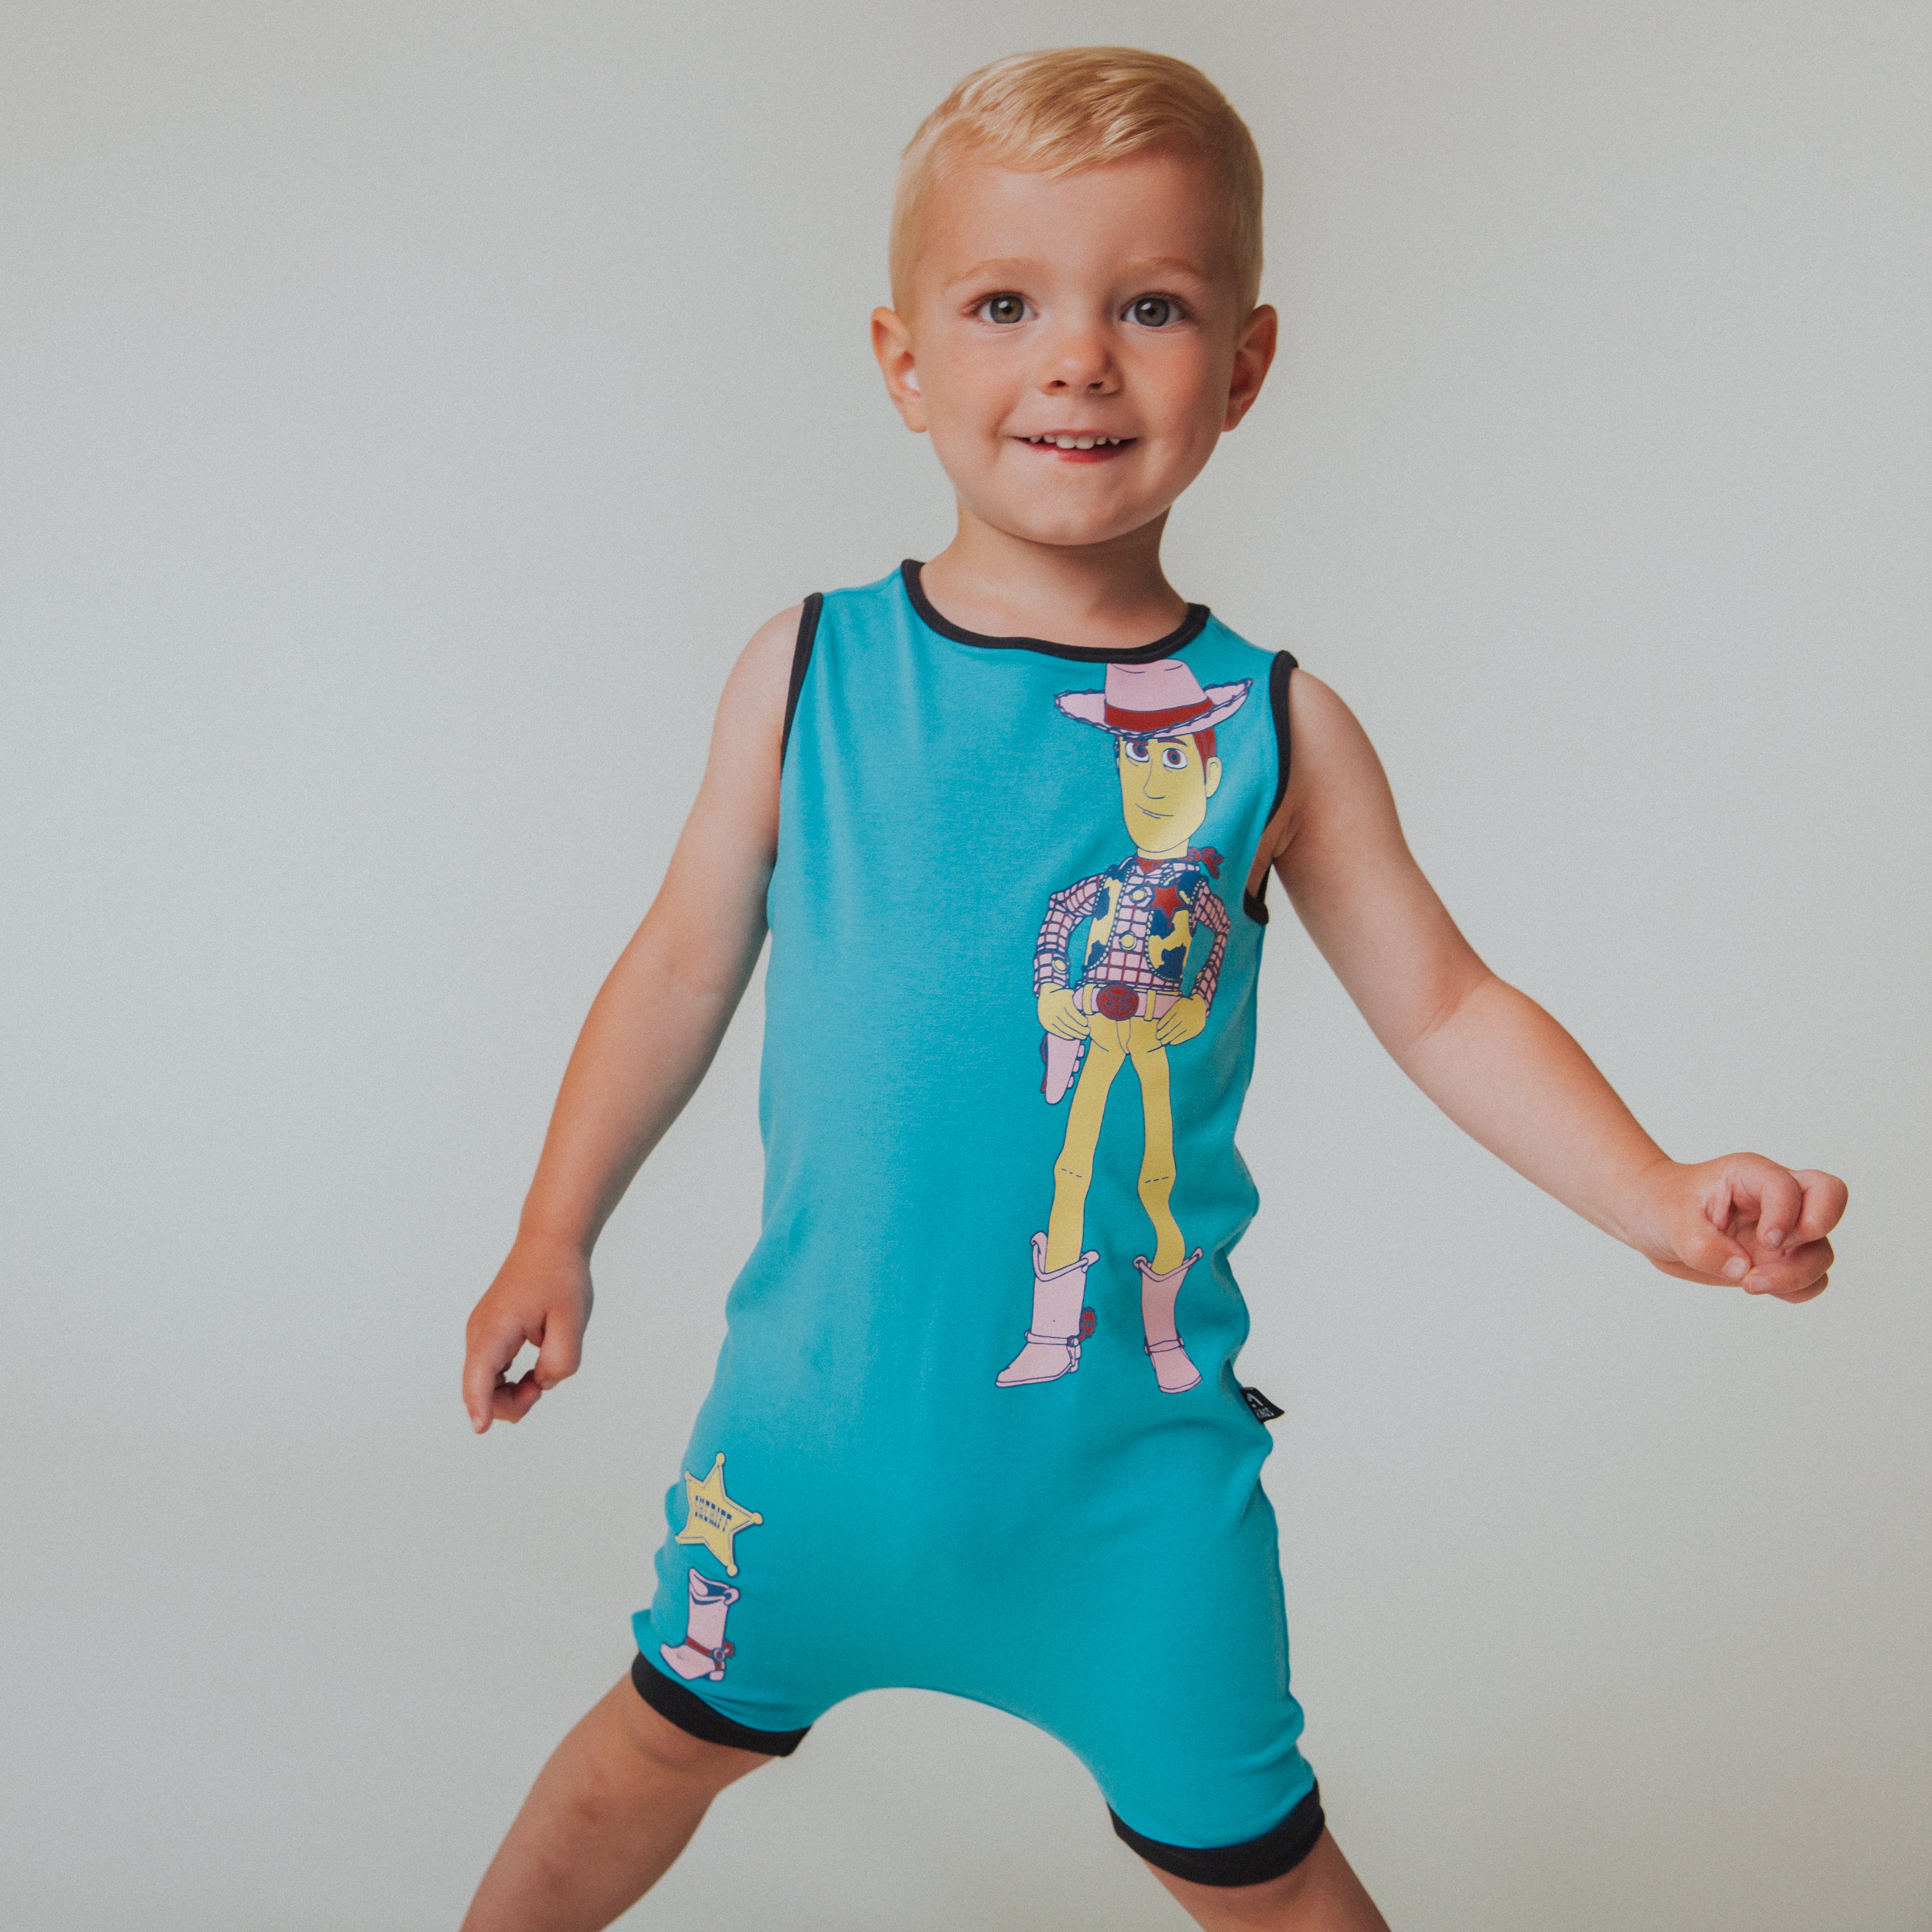 Tank Short Rag Romper - 'Toy Story Woody' - Disney Pixar Collection from RAGS